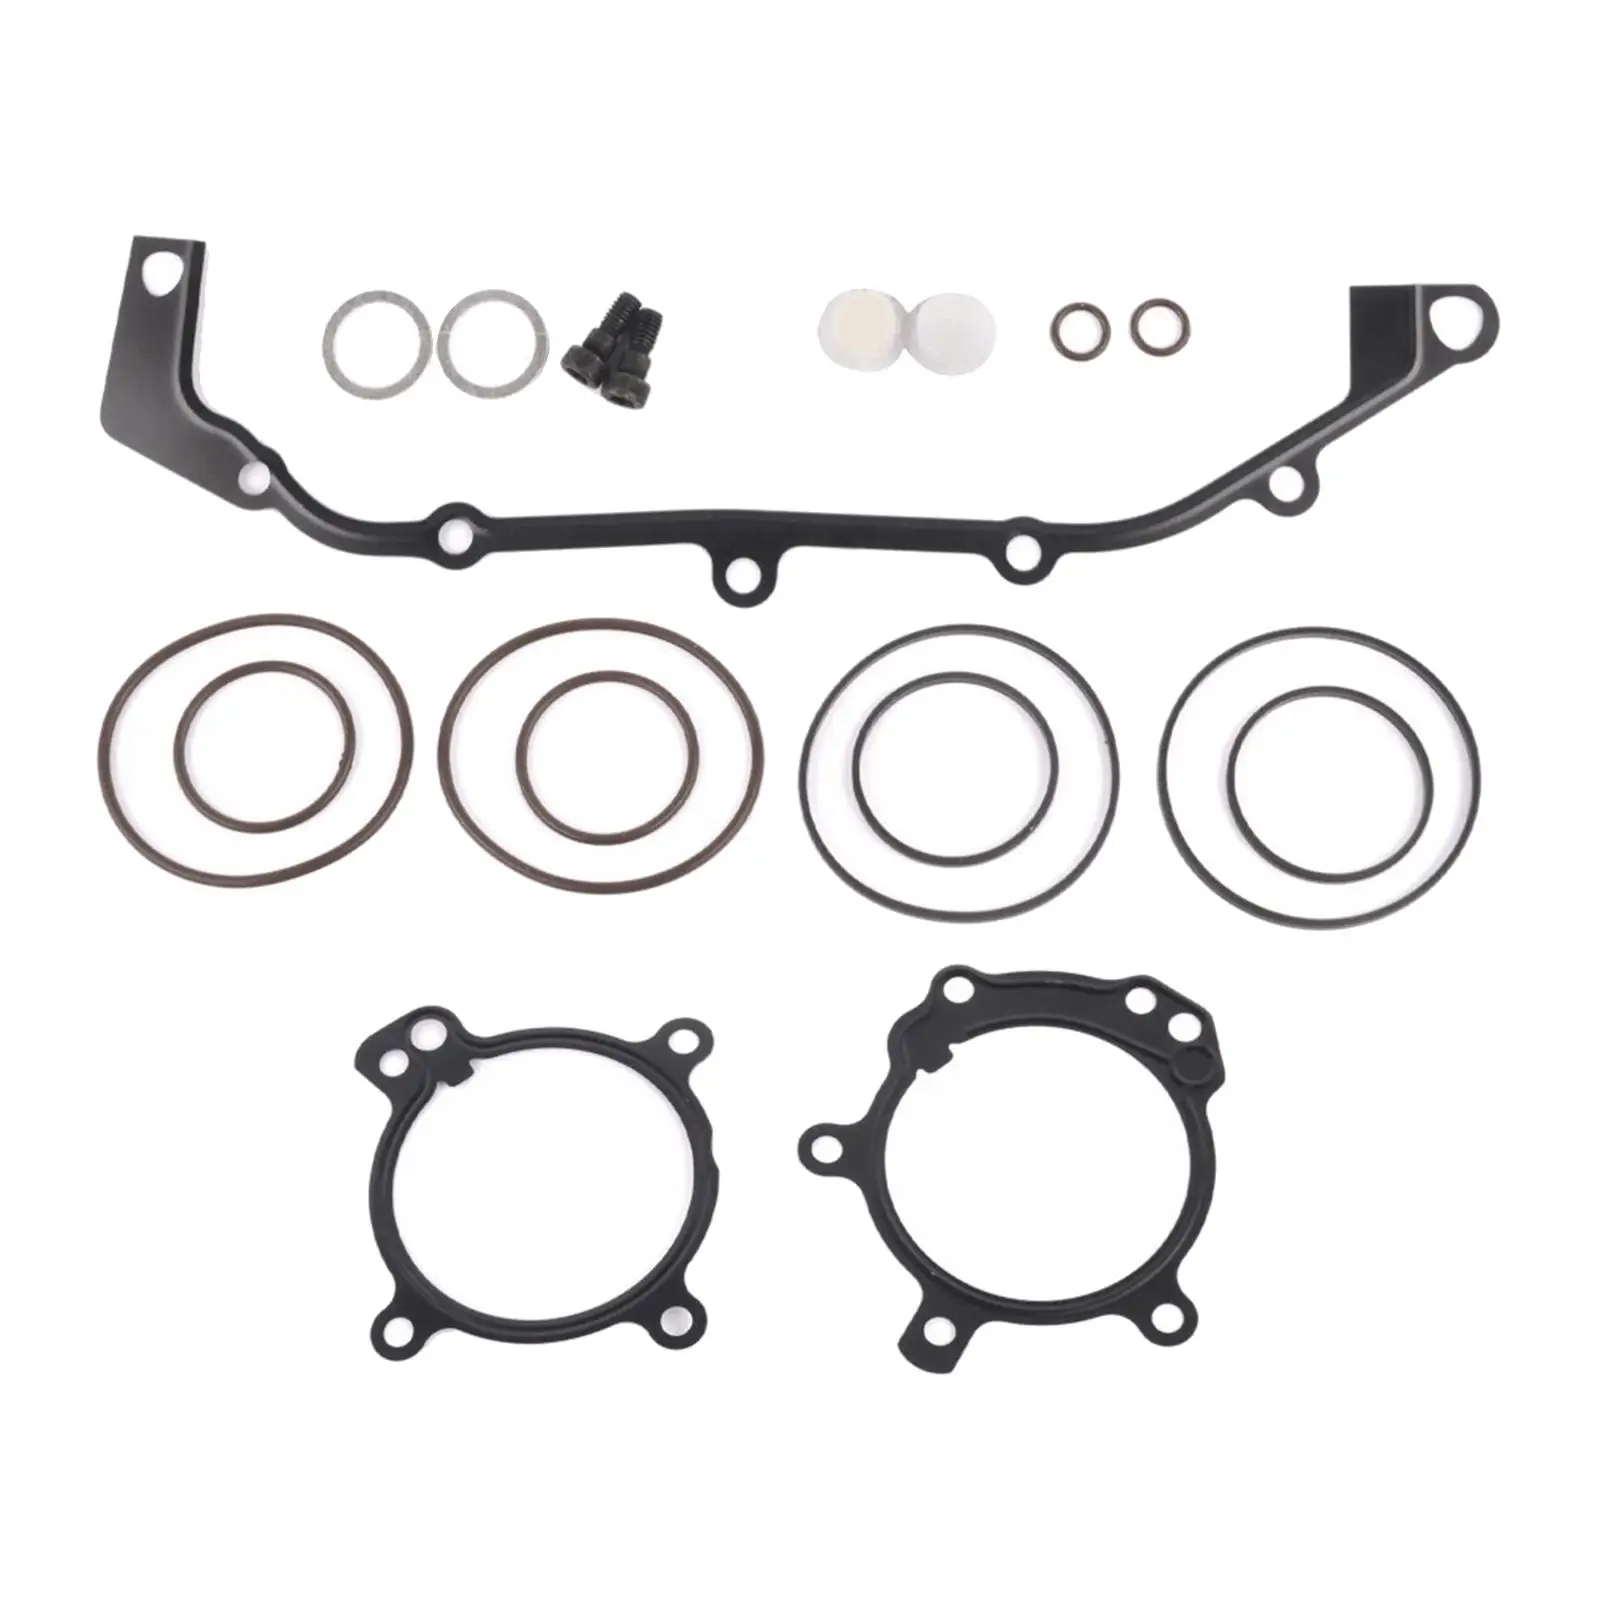 O-Ring Seal Repair Kit 11361433513 for  E36 E39 Replaces Spare Parts